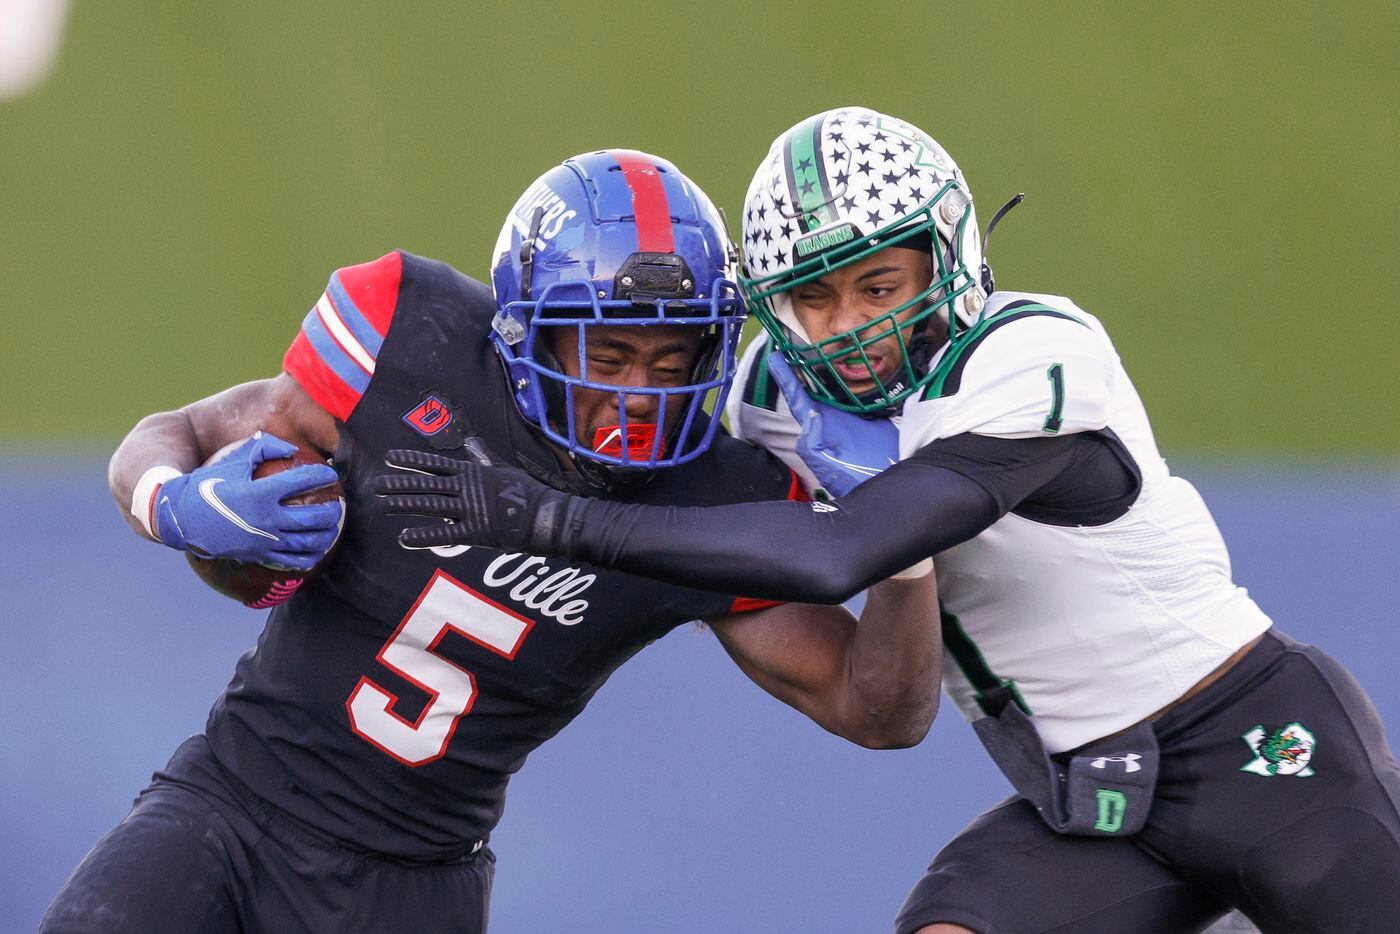 Southlake Carroll defensive back Avyonne Jones (1) tackles Duncanville running back Malachi Medlock (5) during the first half of their Class 6A Division I state semifinal playoff game at McKinney ISD Stadium in McKinney, Texas, Saturday, Dec. 11, 2021. (Elias Valverde II/The Dallas Morning News)